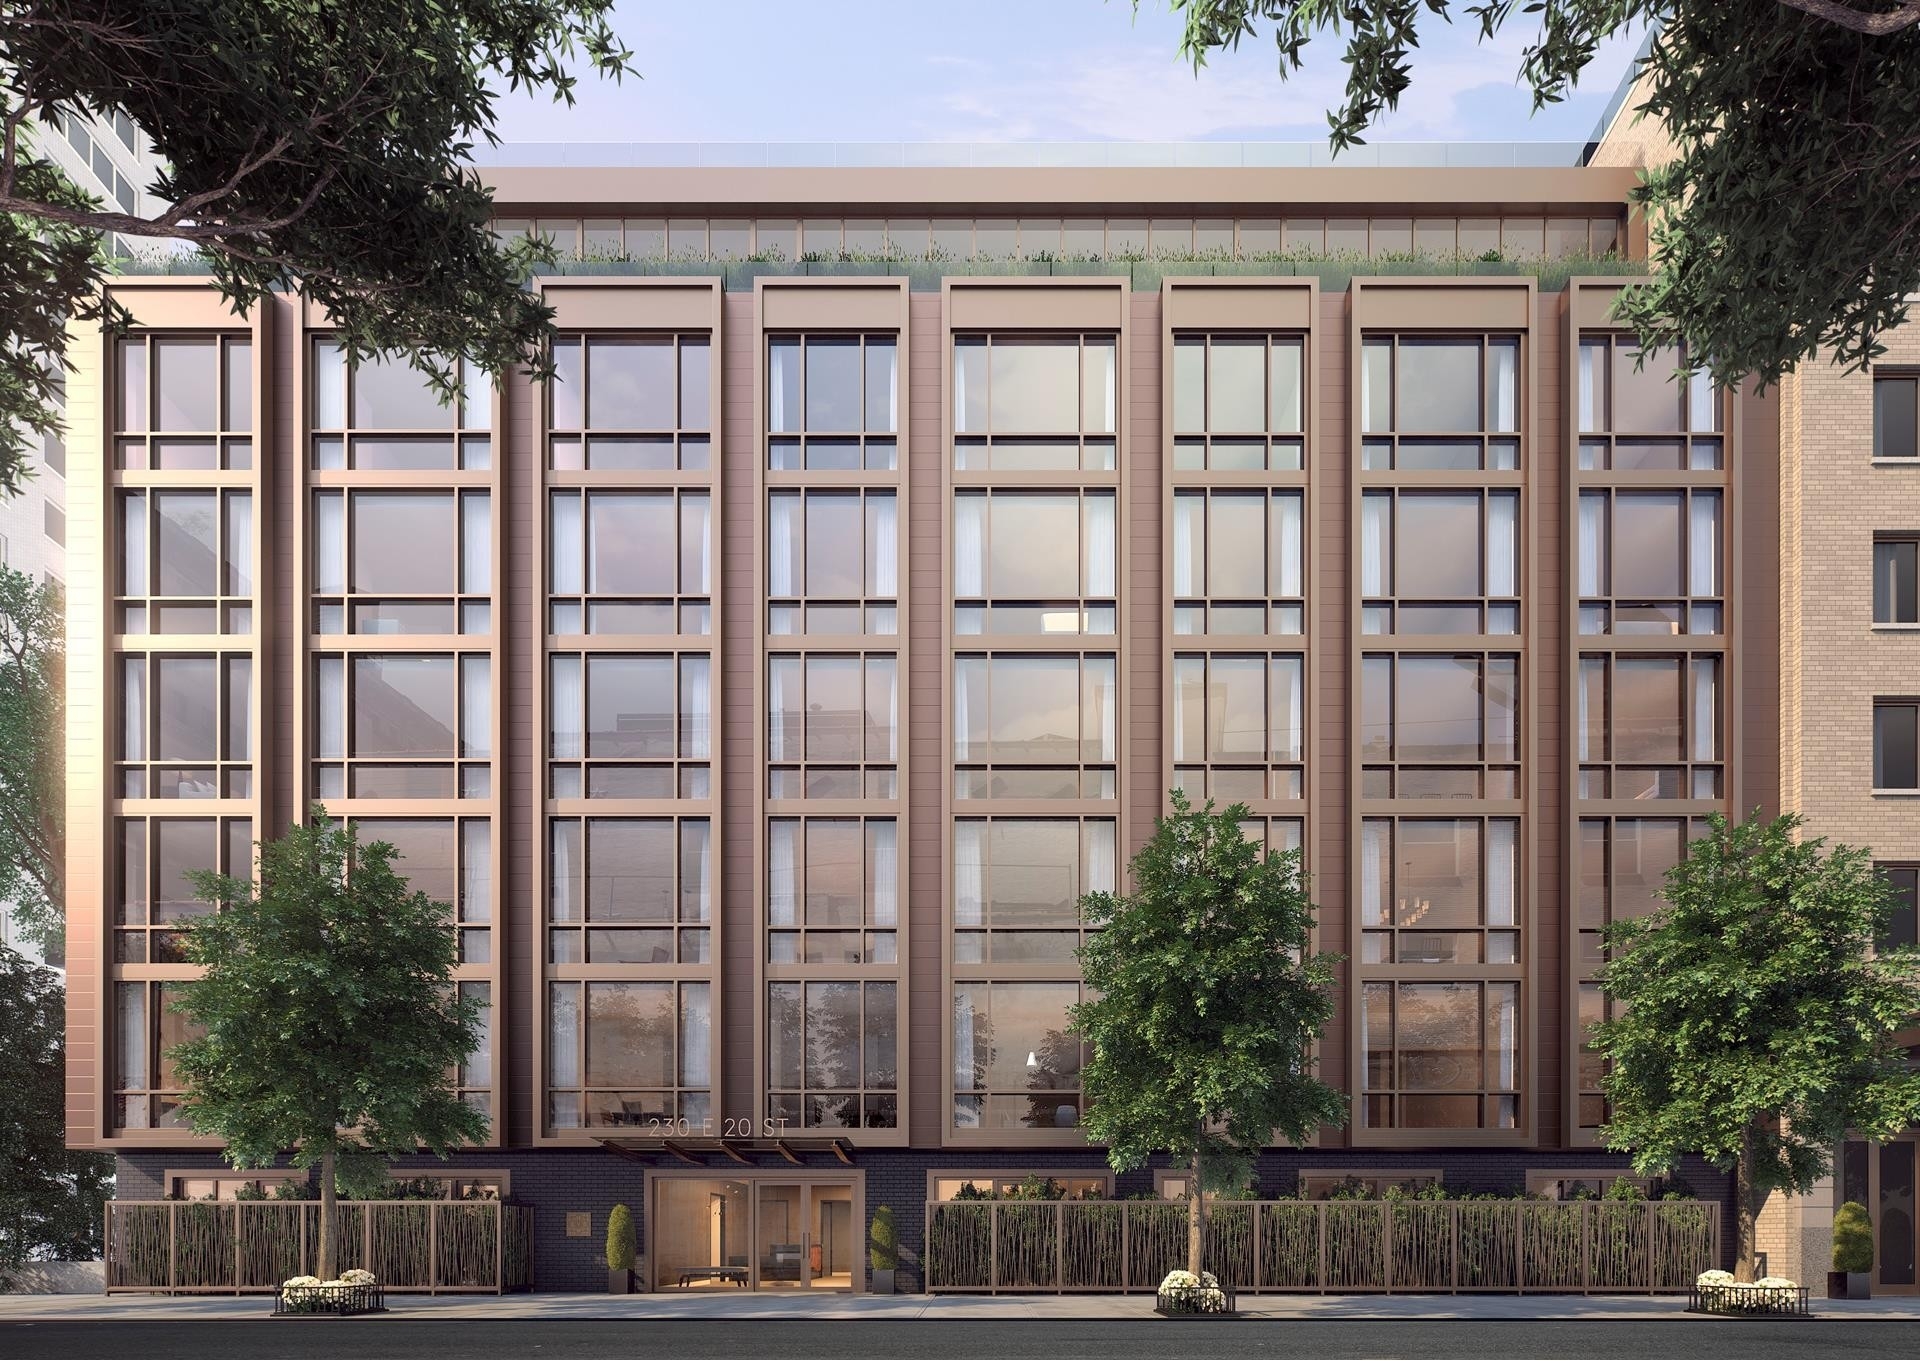 7. Condominiums for Sale at The Modern At Gramercy Square, 230 E 20TH ST, 54 Gramercy Park, New York, New York 10003